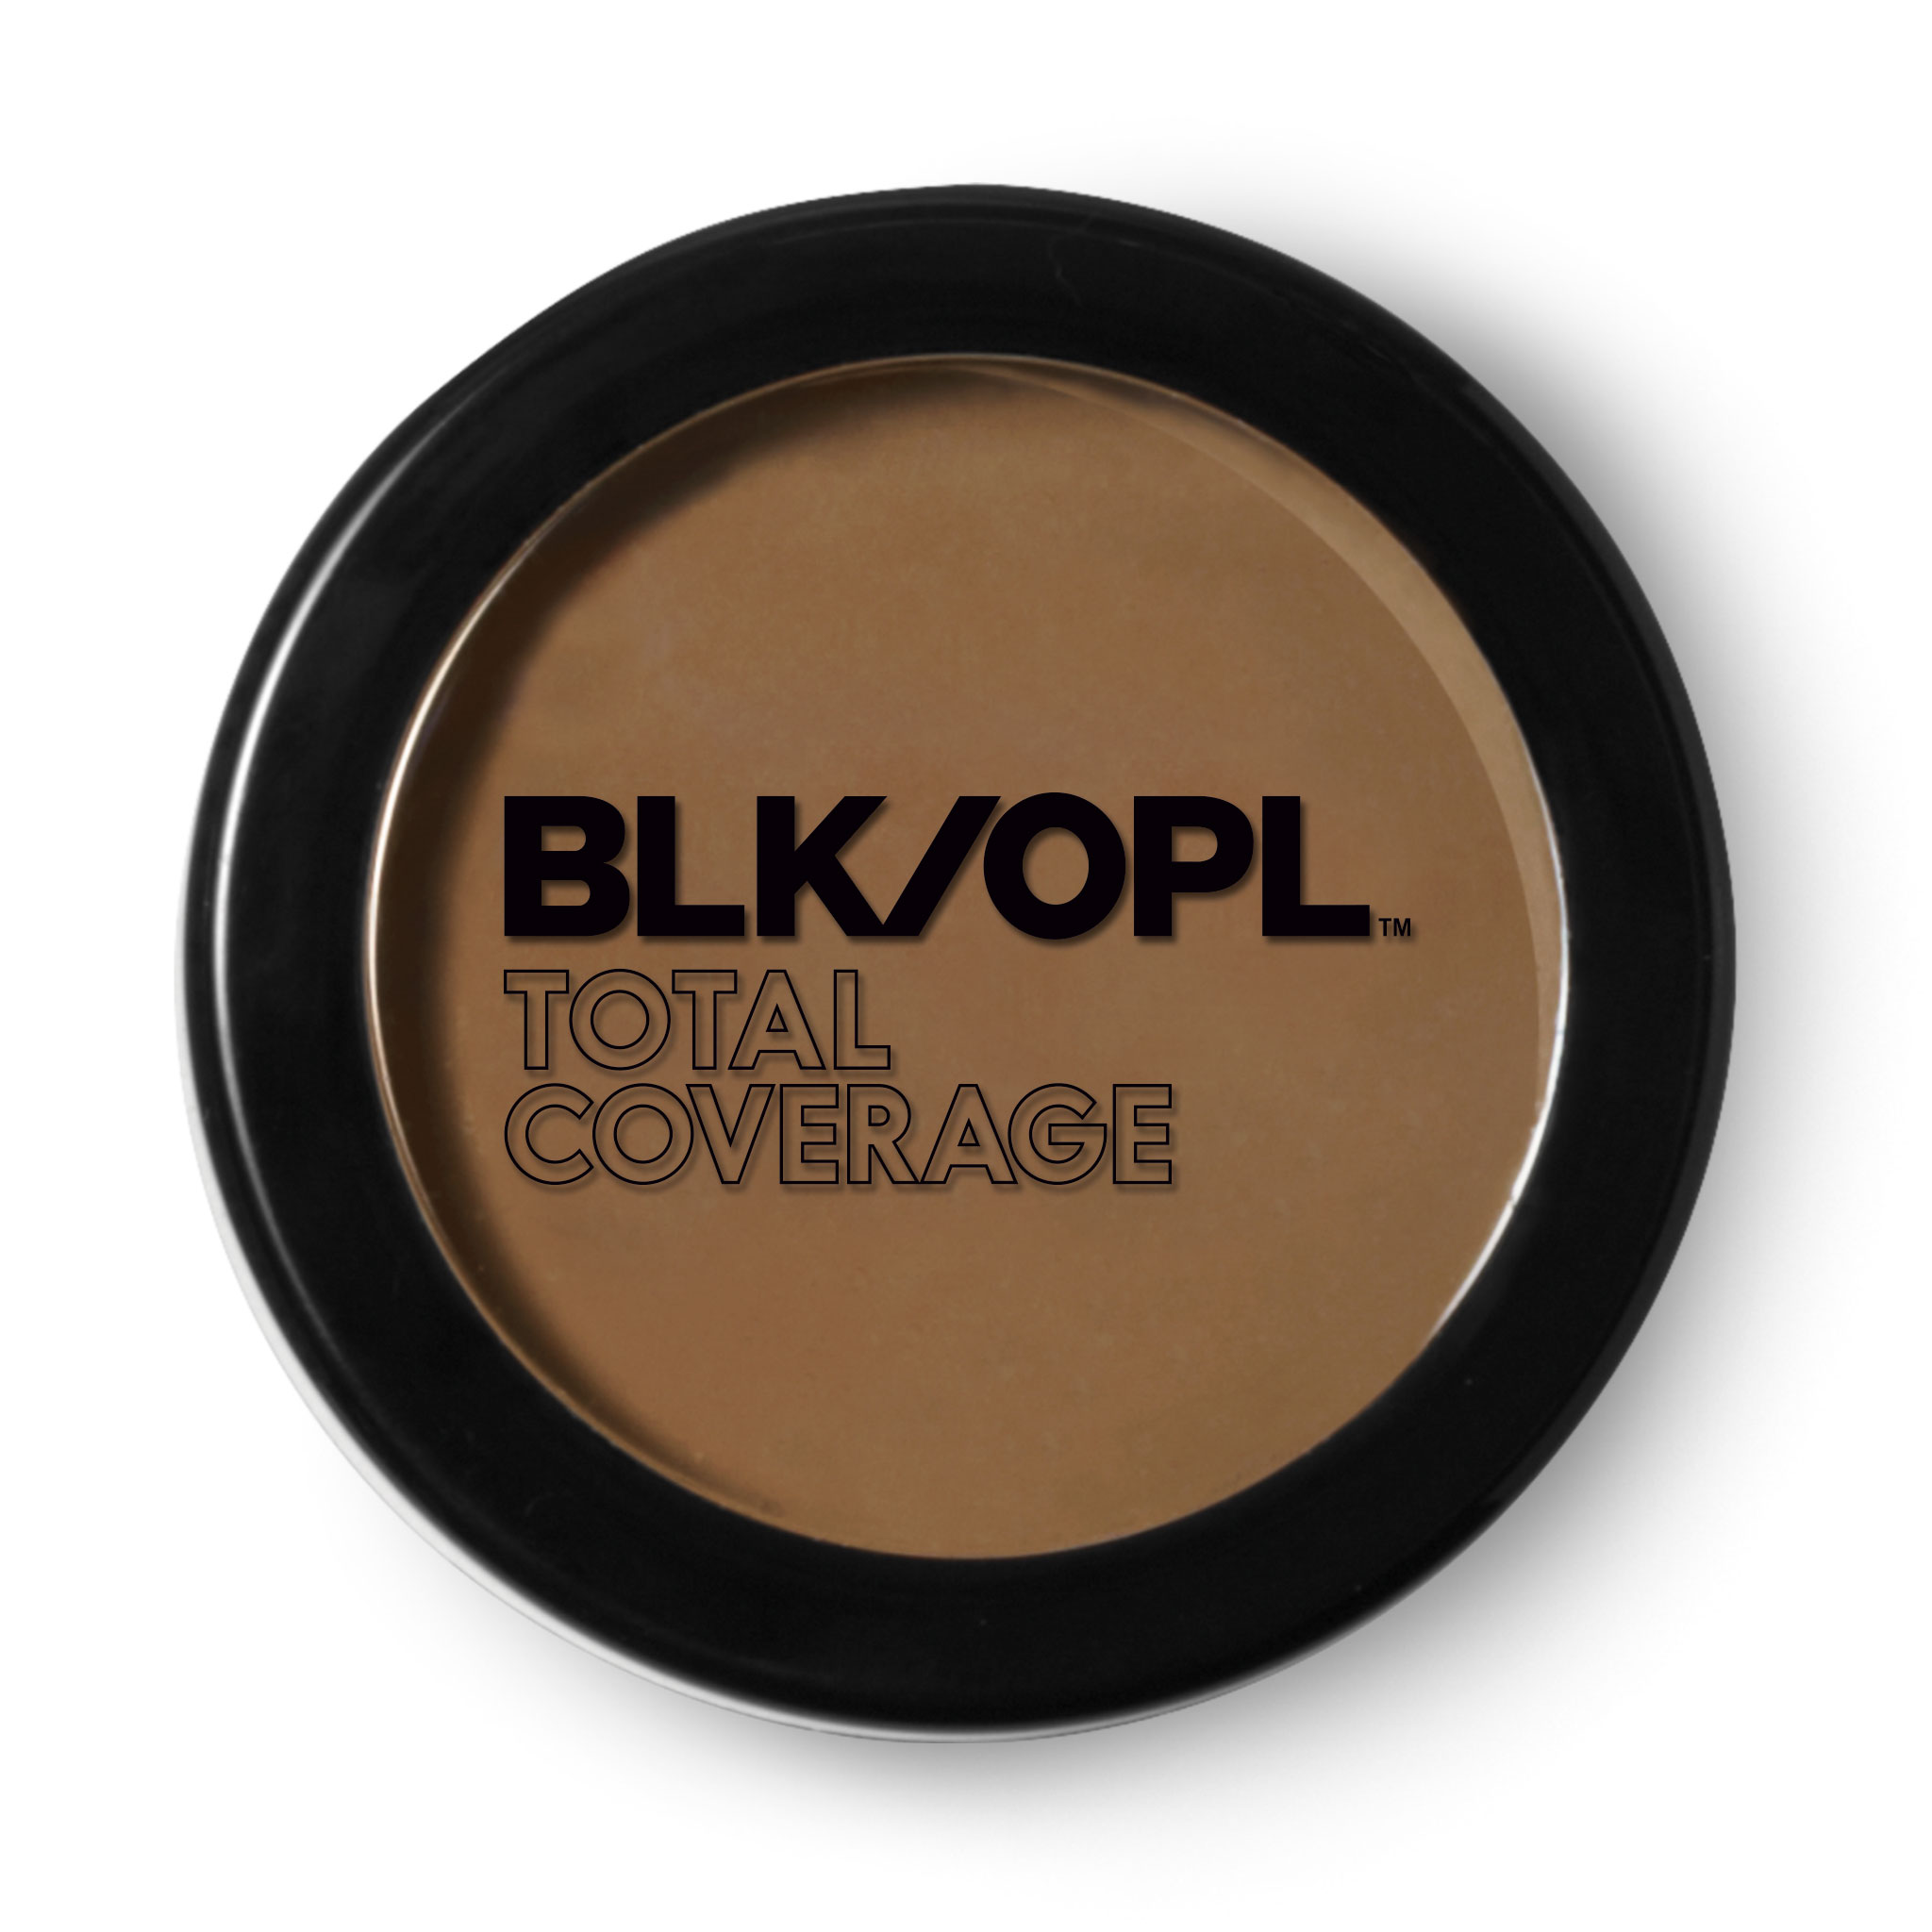 Black Opal Total Coverage Concealing Foundation, Face and Body, Hazelnut - image 1 of 3